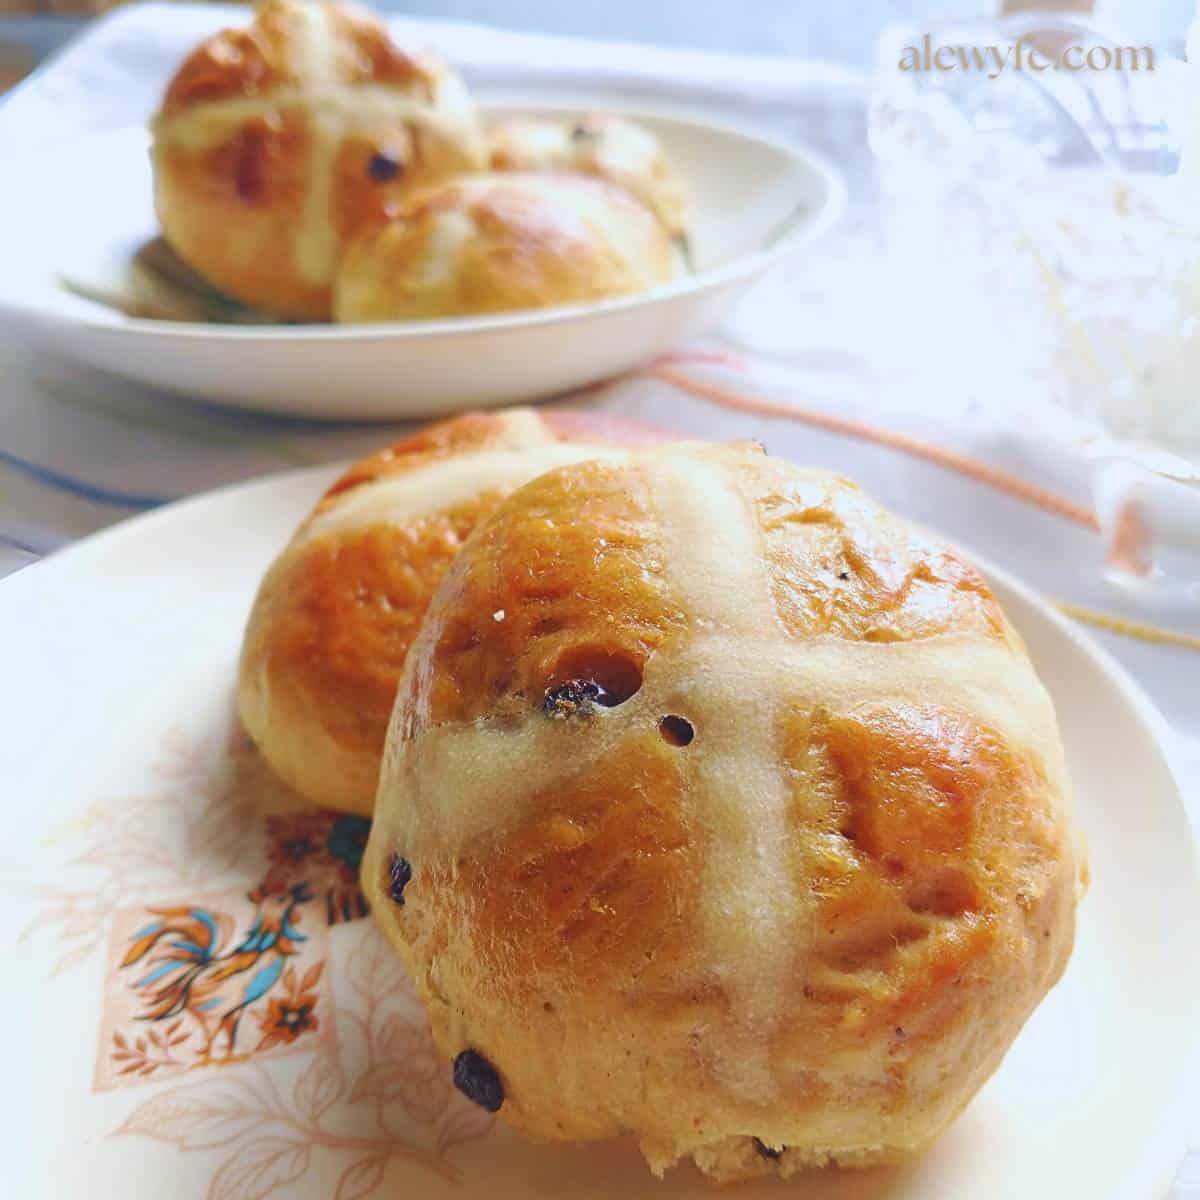 side view of two plates of traditional hot cross buns with currants, on a vintage plate with a crowing rooster.